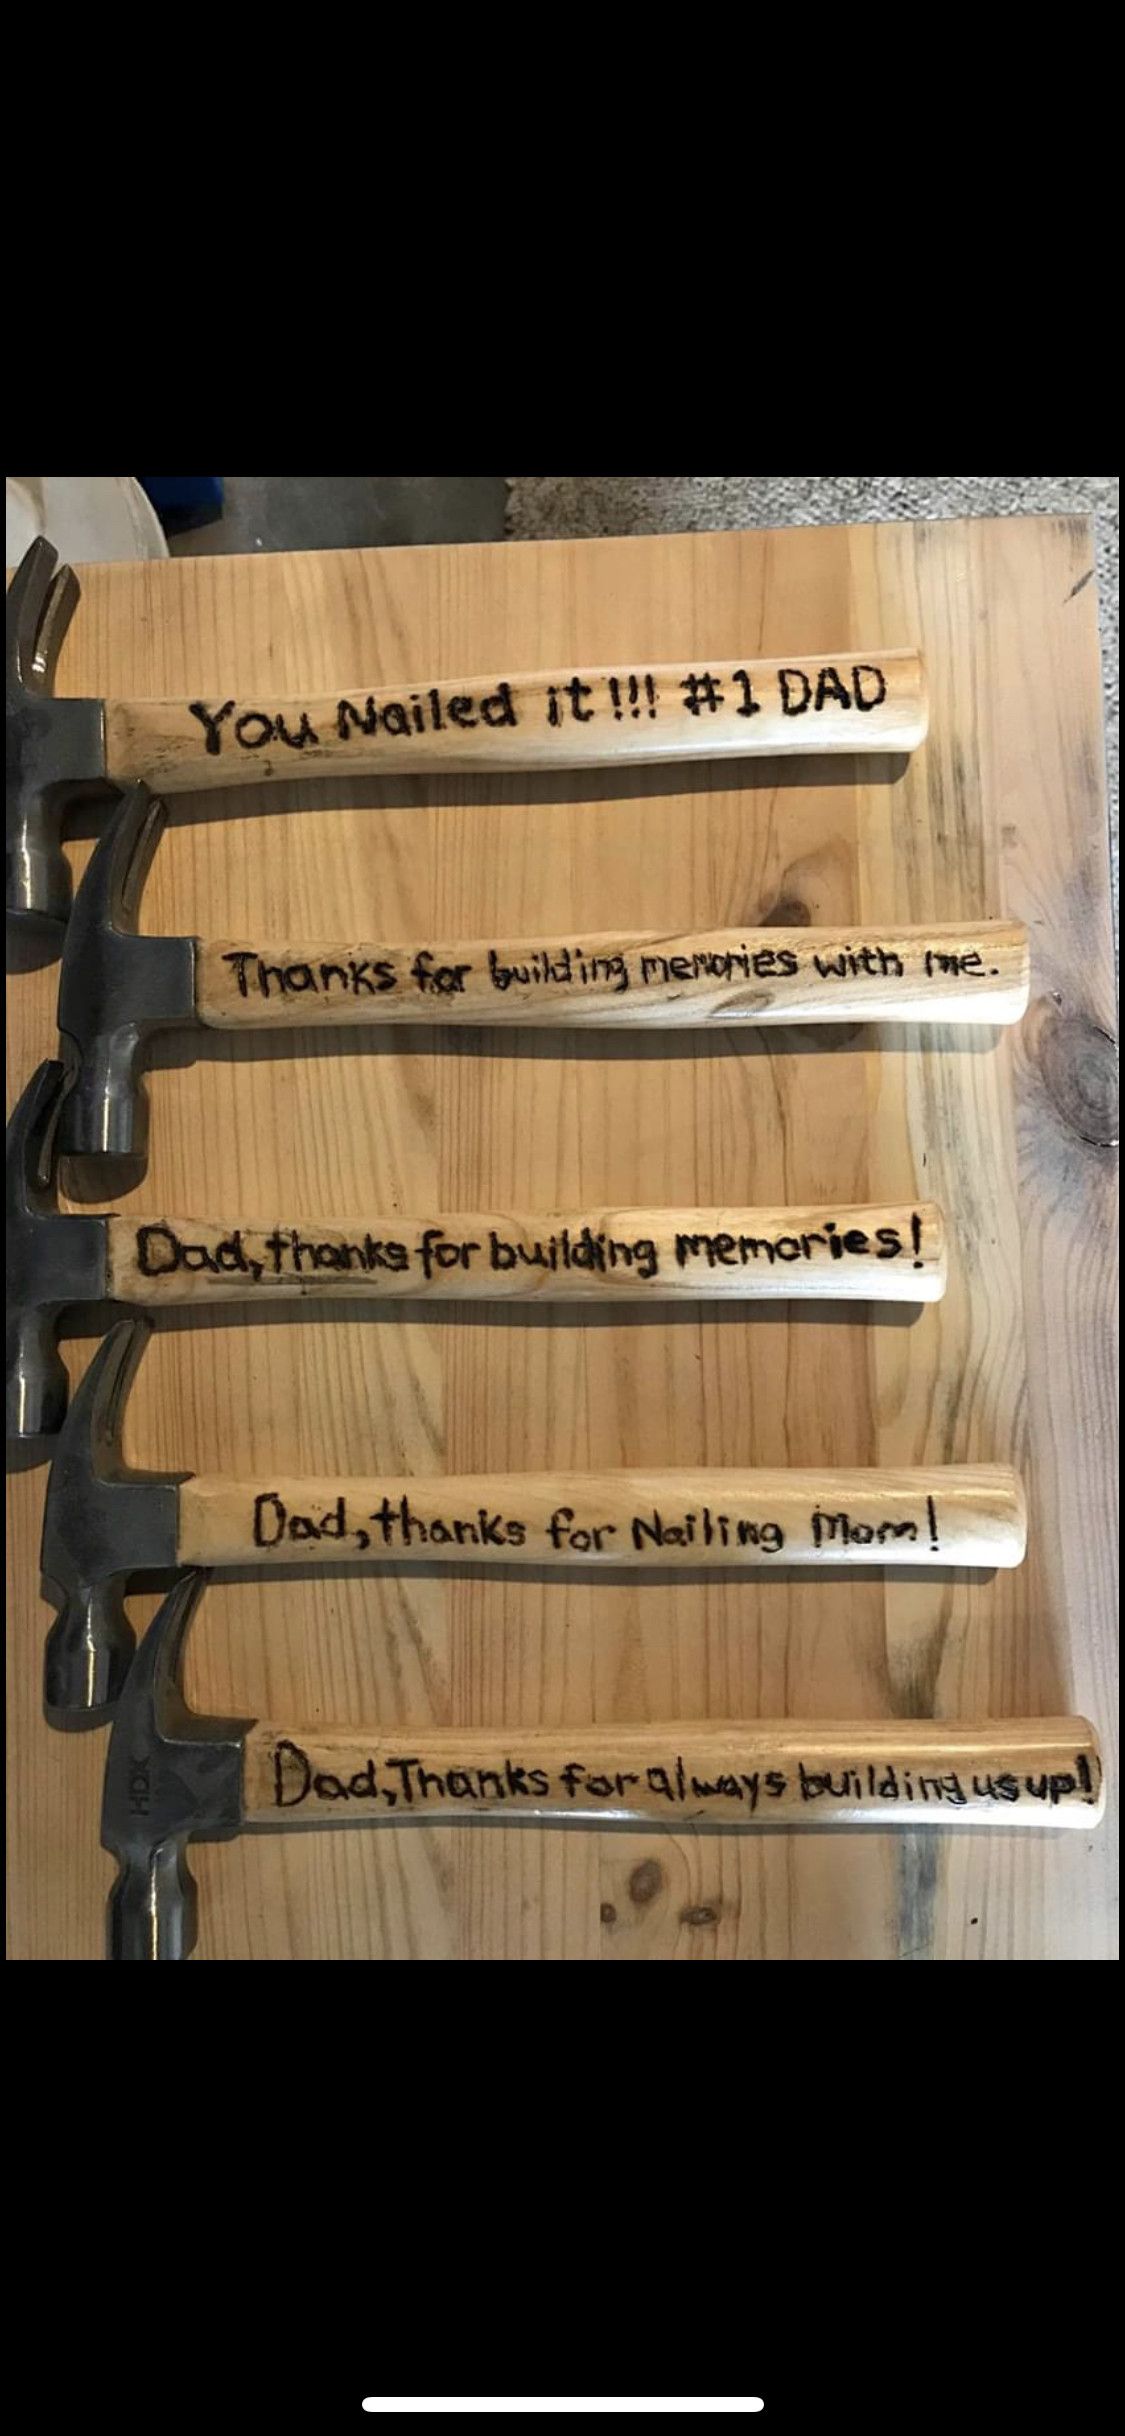 One of these homemade Father’s Day gifts is not like the others.